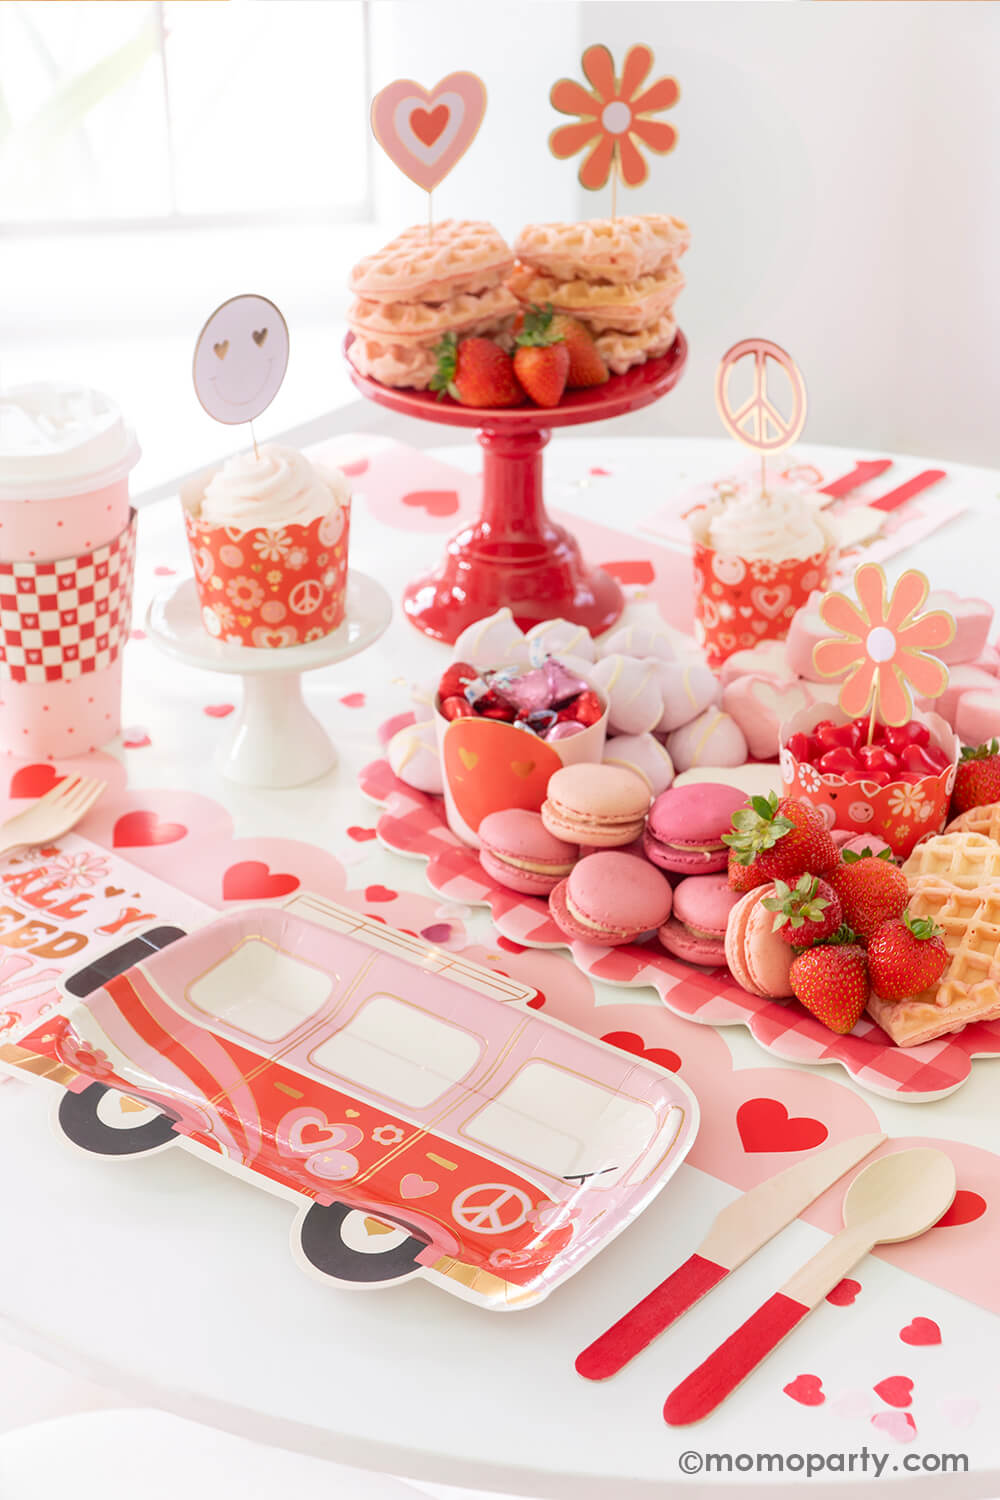 A party table featuring Momo Party's Groovy Valentine's party box with My Mind's Eye's retro Valentine's party supplies including VW bus shaped plates, red checkered party cups, baking cup and topper set and "all you need is love" napkins. On the table there's a heart shaped sweet board filled with Valentine's Day themed treats including macarons, strawberries, heart shaped marshmallows, heart shaped pink waffles and candies, a perfect inspo for a fun Valentine's celebration!